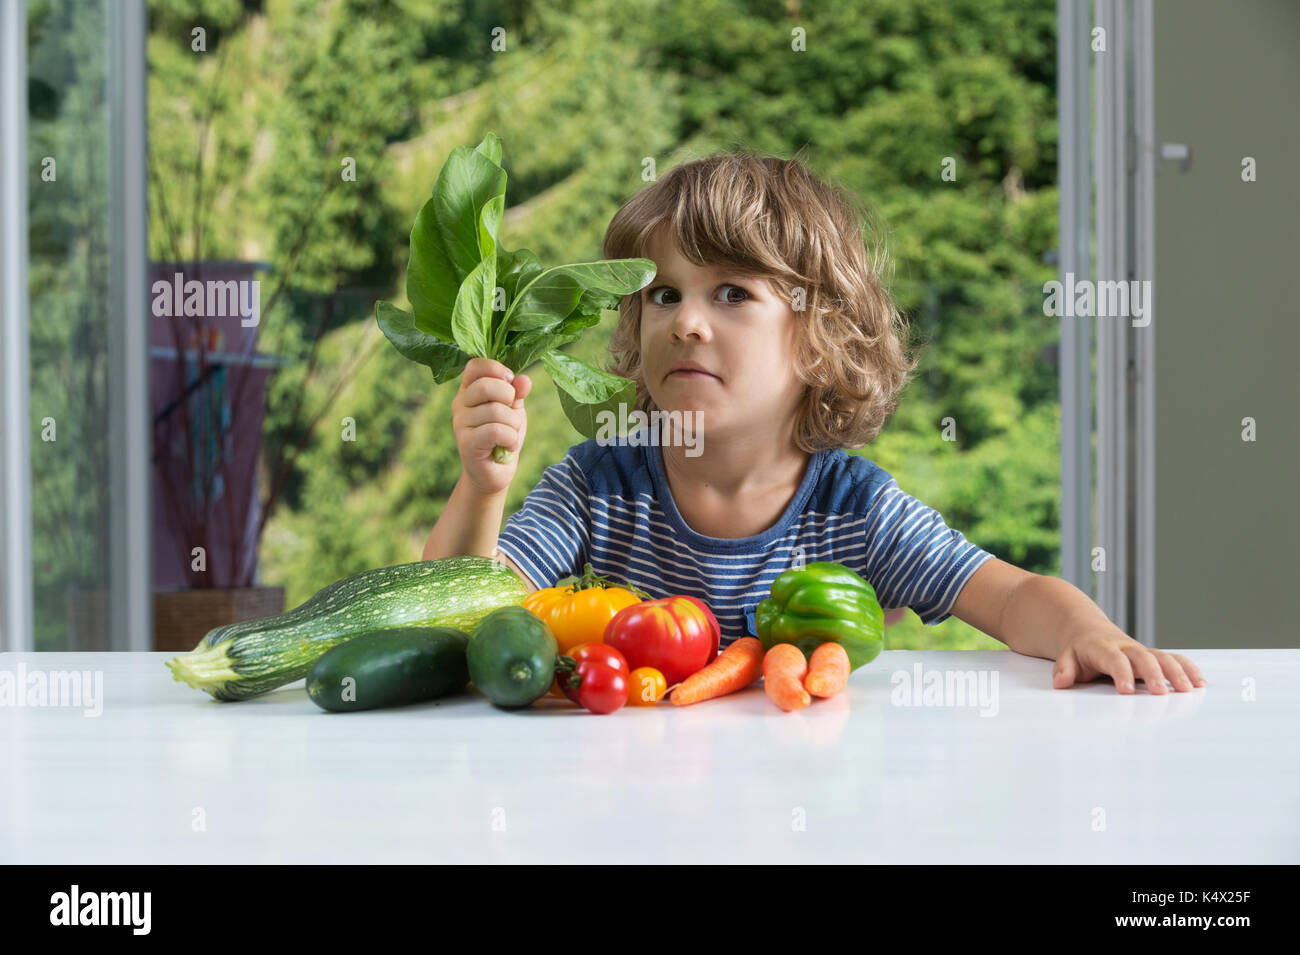 Cute little boy sitting at the table, expressing mixed emotions over vegetable meal, bad eating habits, nutrition and healthy eating concept Stock Photo